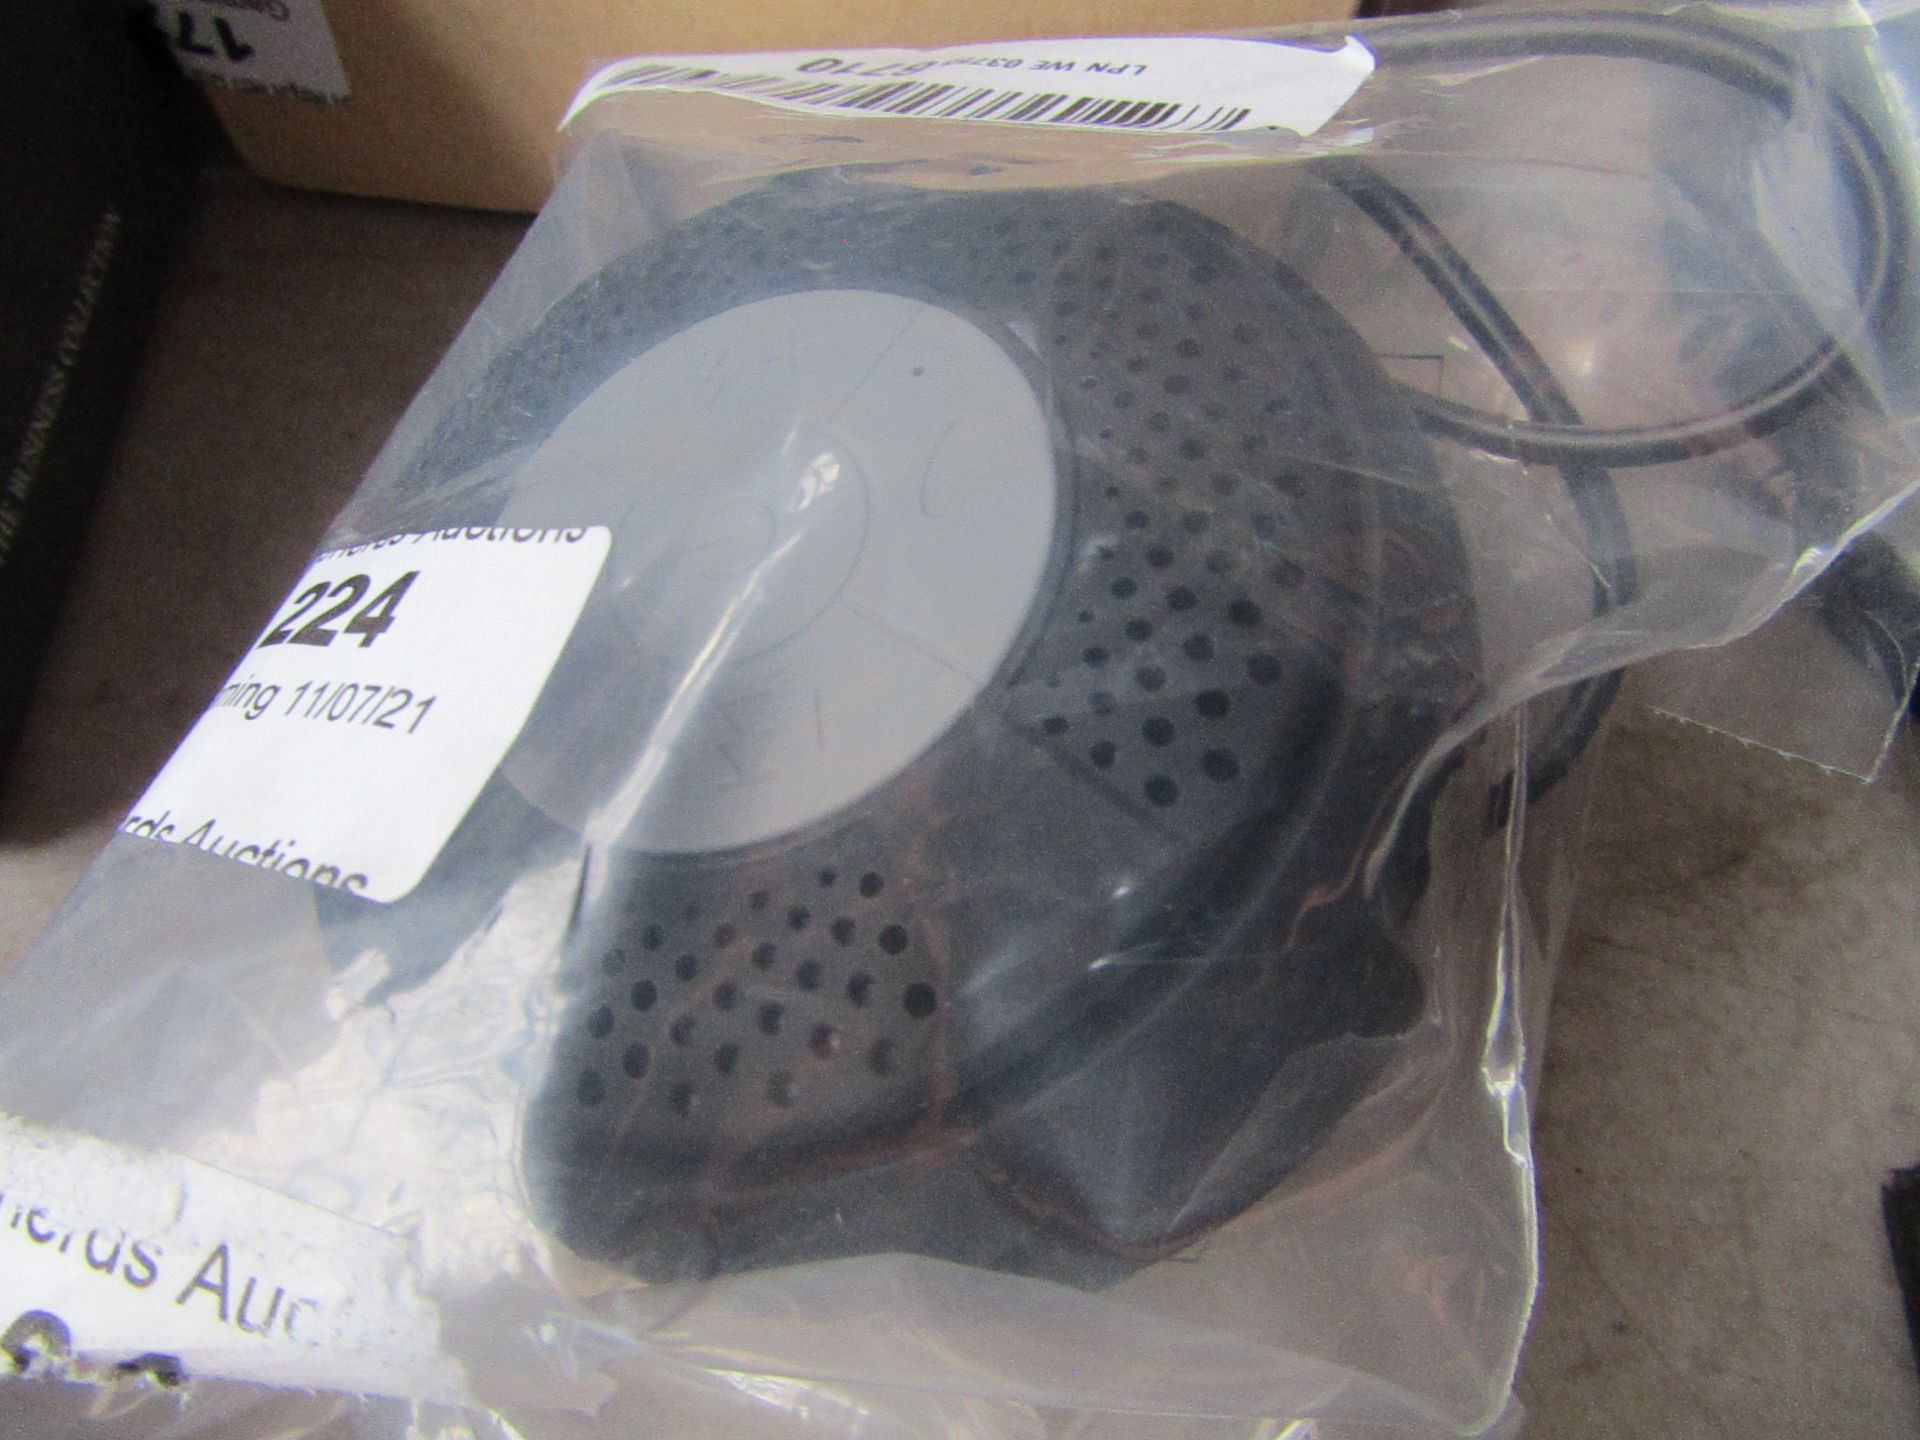 Trotronics - Water-Proof Speaker - Untested, Non Original Packaging.